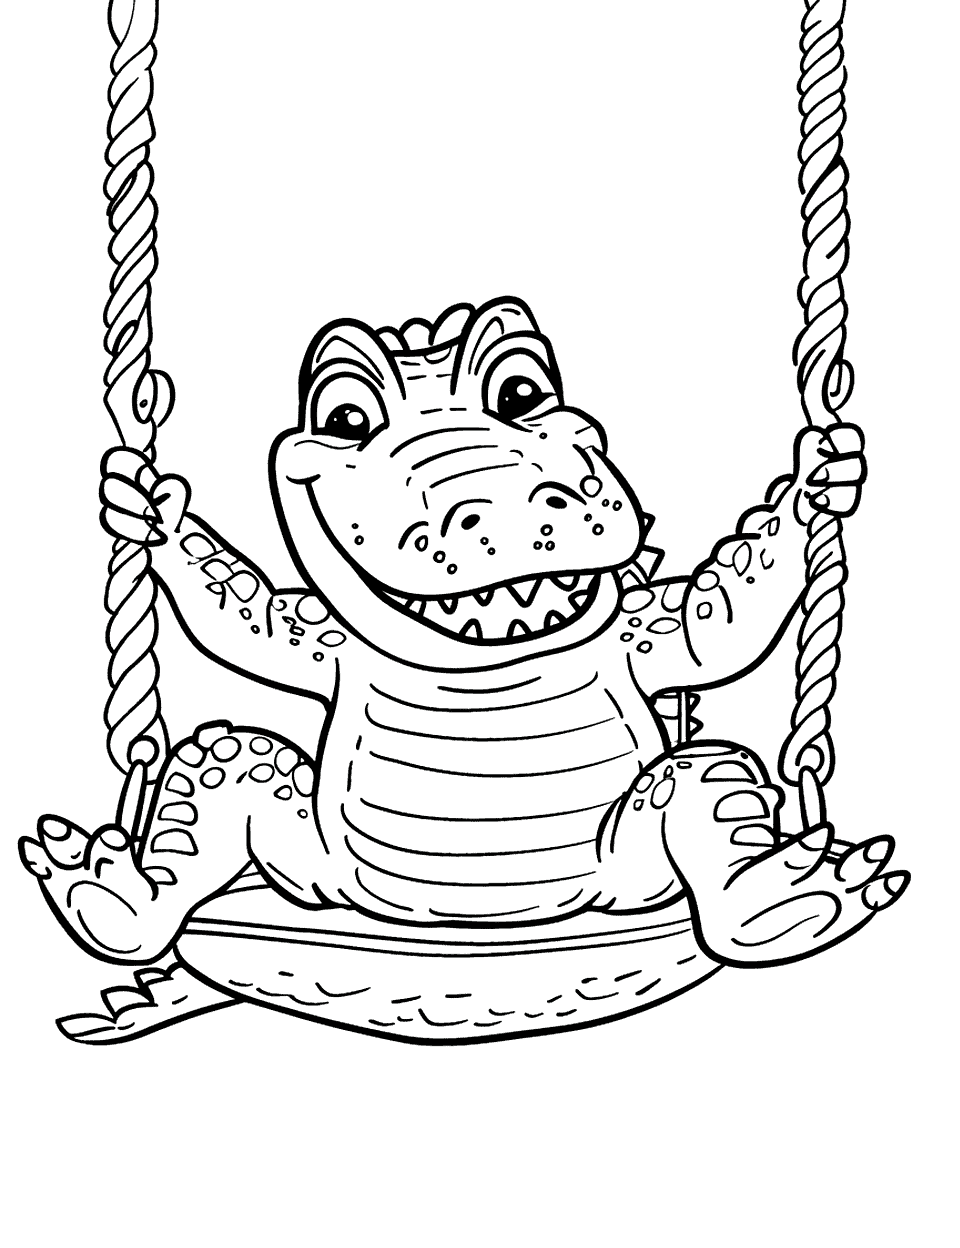 Alligator on a Swing Coloring Page - An alligator swinging happily on a playground swing.